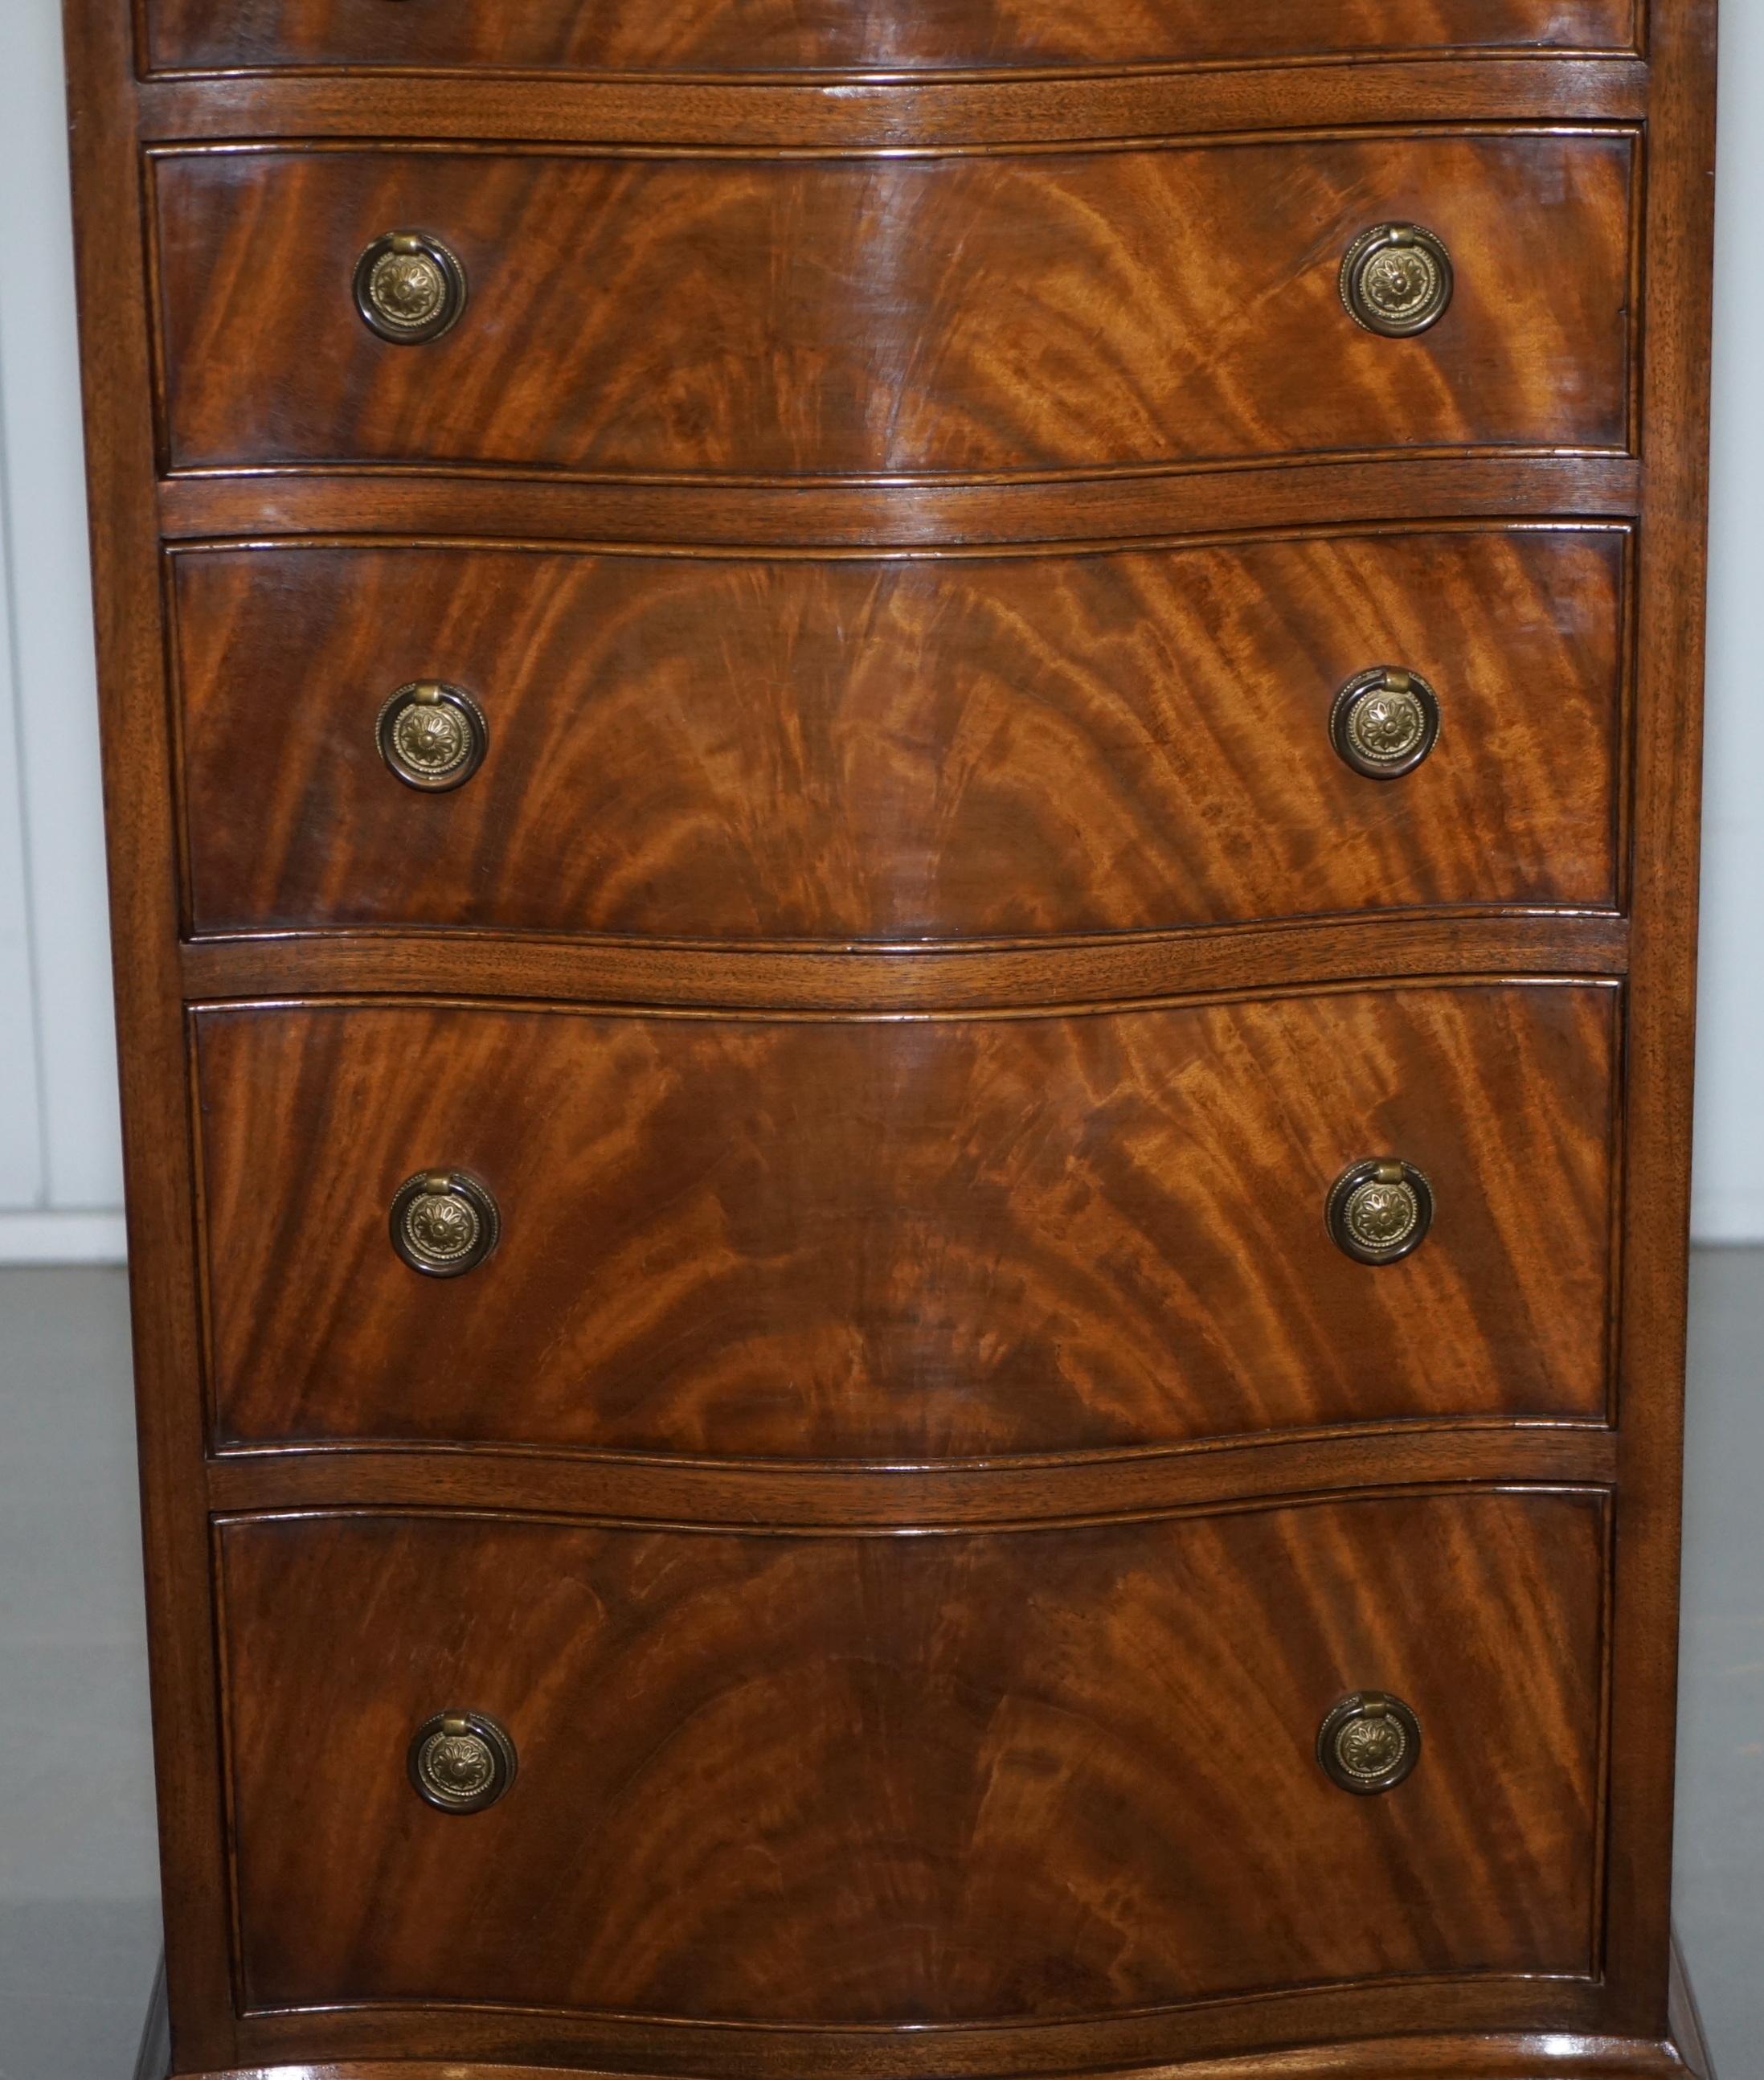 English Nice Flamed Hardwood Bevan Funnell Serpentine Fronted Tall Boy Chest of Drawers